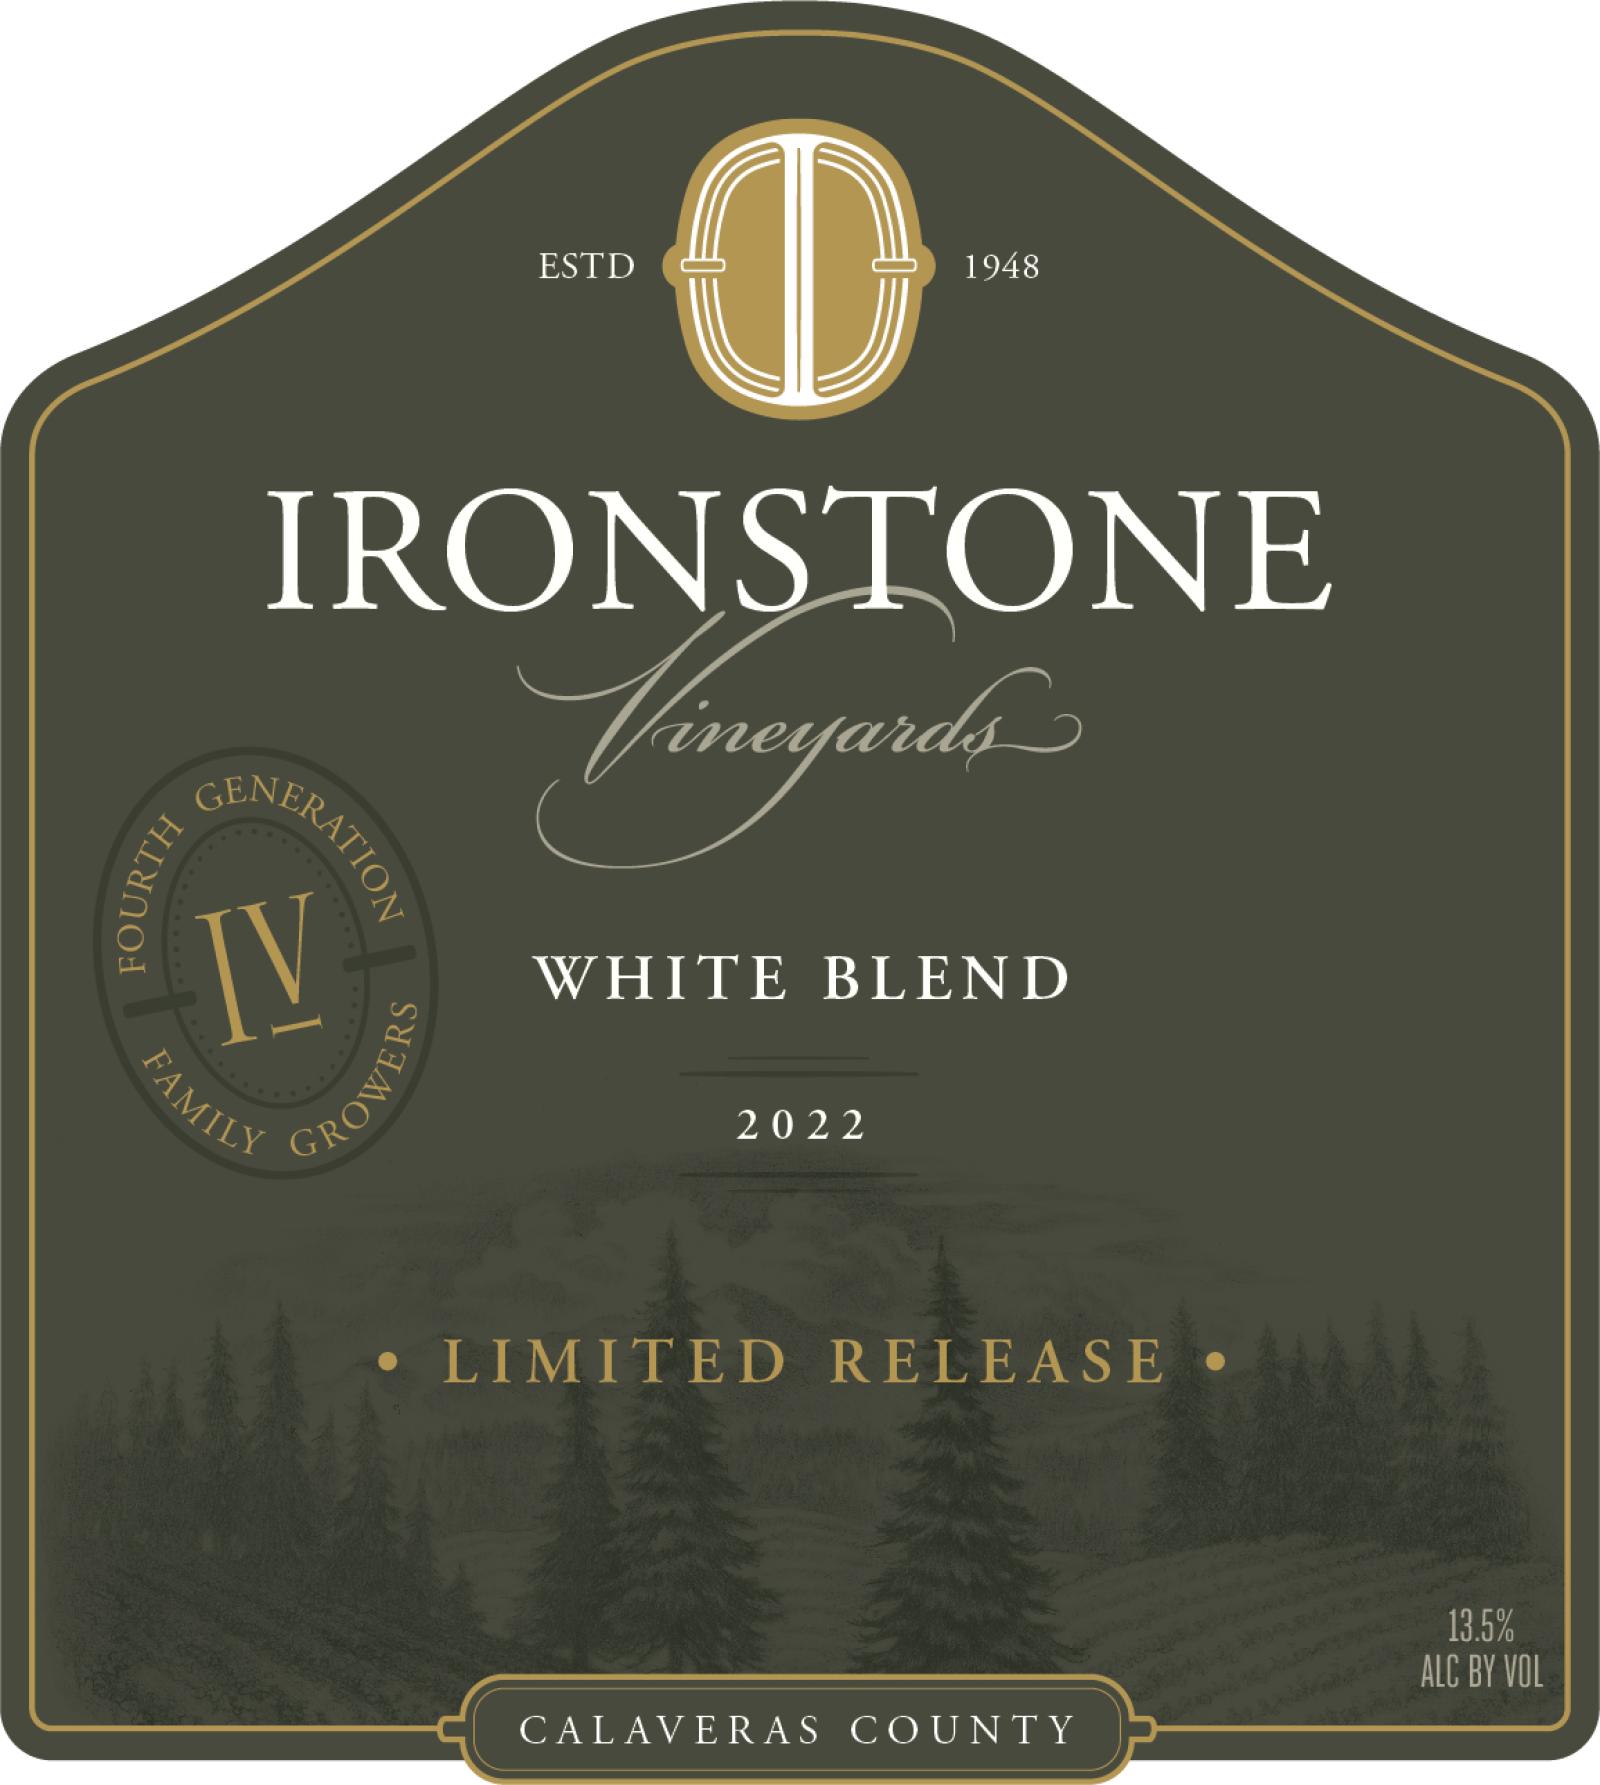 Limited Release White Blend 2022